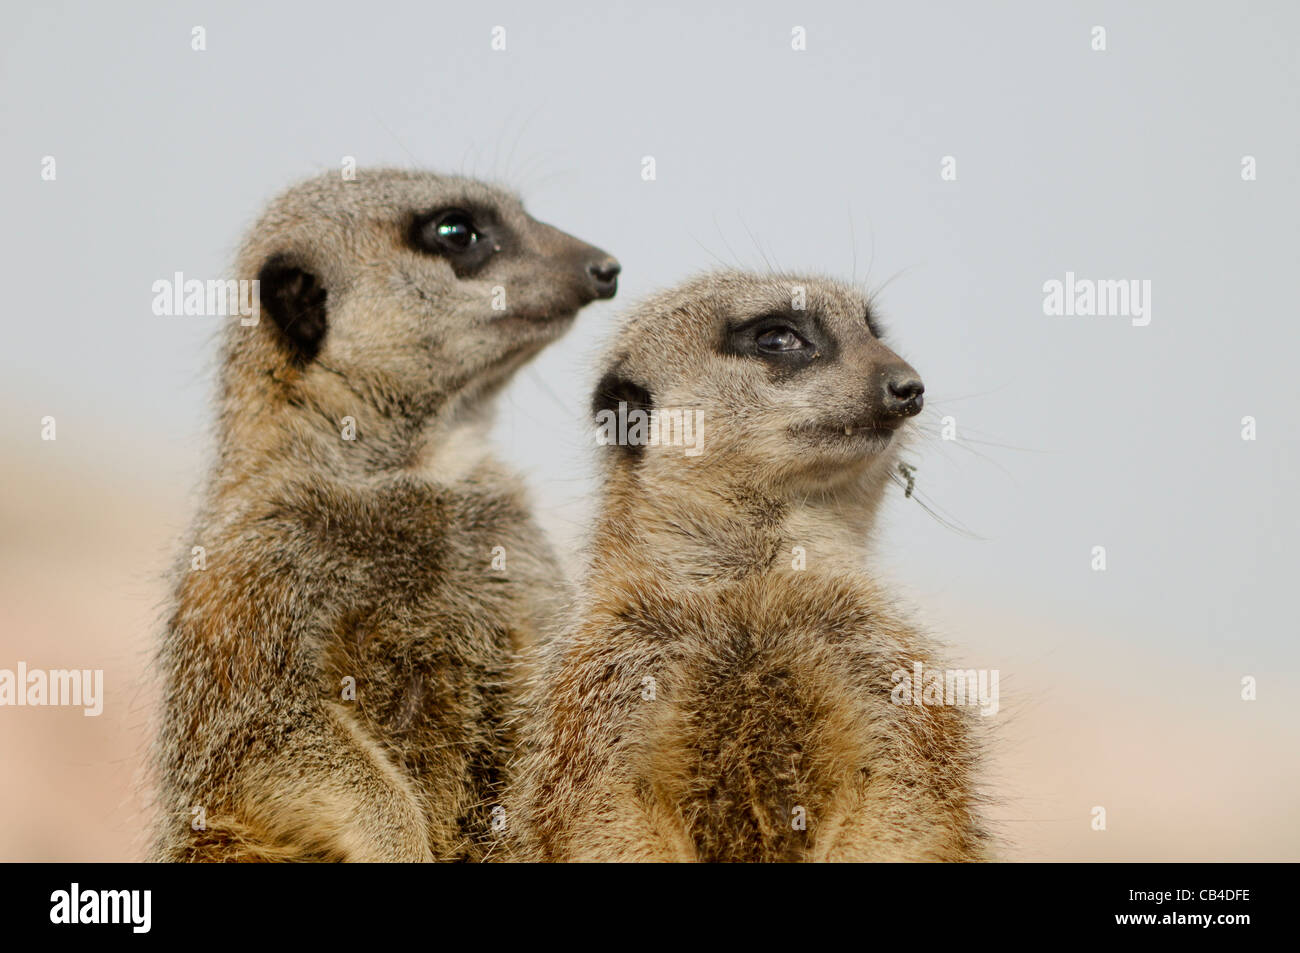 A close-up view of two meerkats looking to the horizon Stock Photo